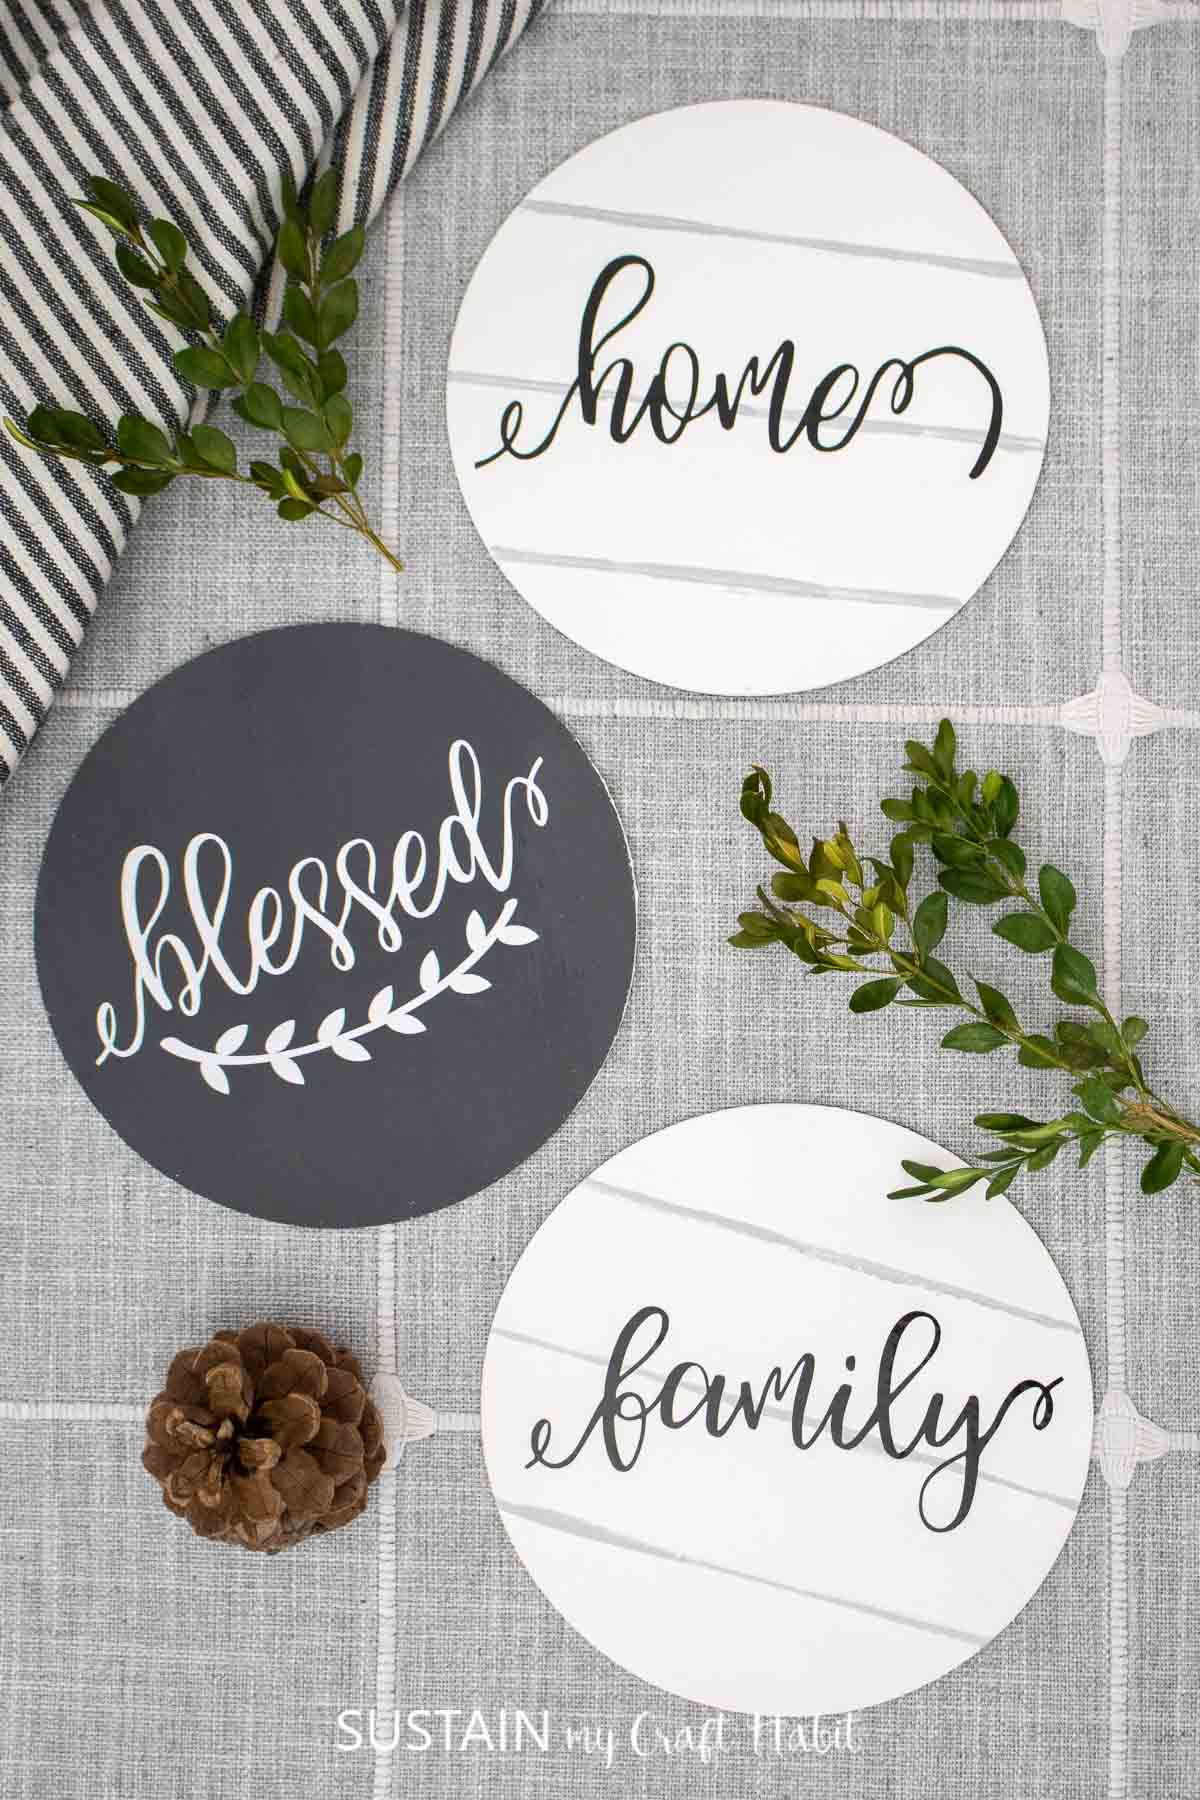 Round wood signs with vinyl lettering decorated with pine cones and greenery.